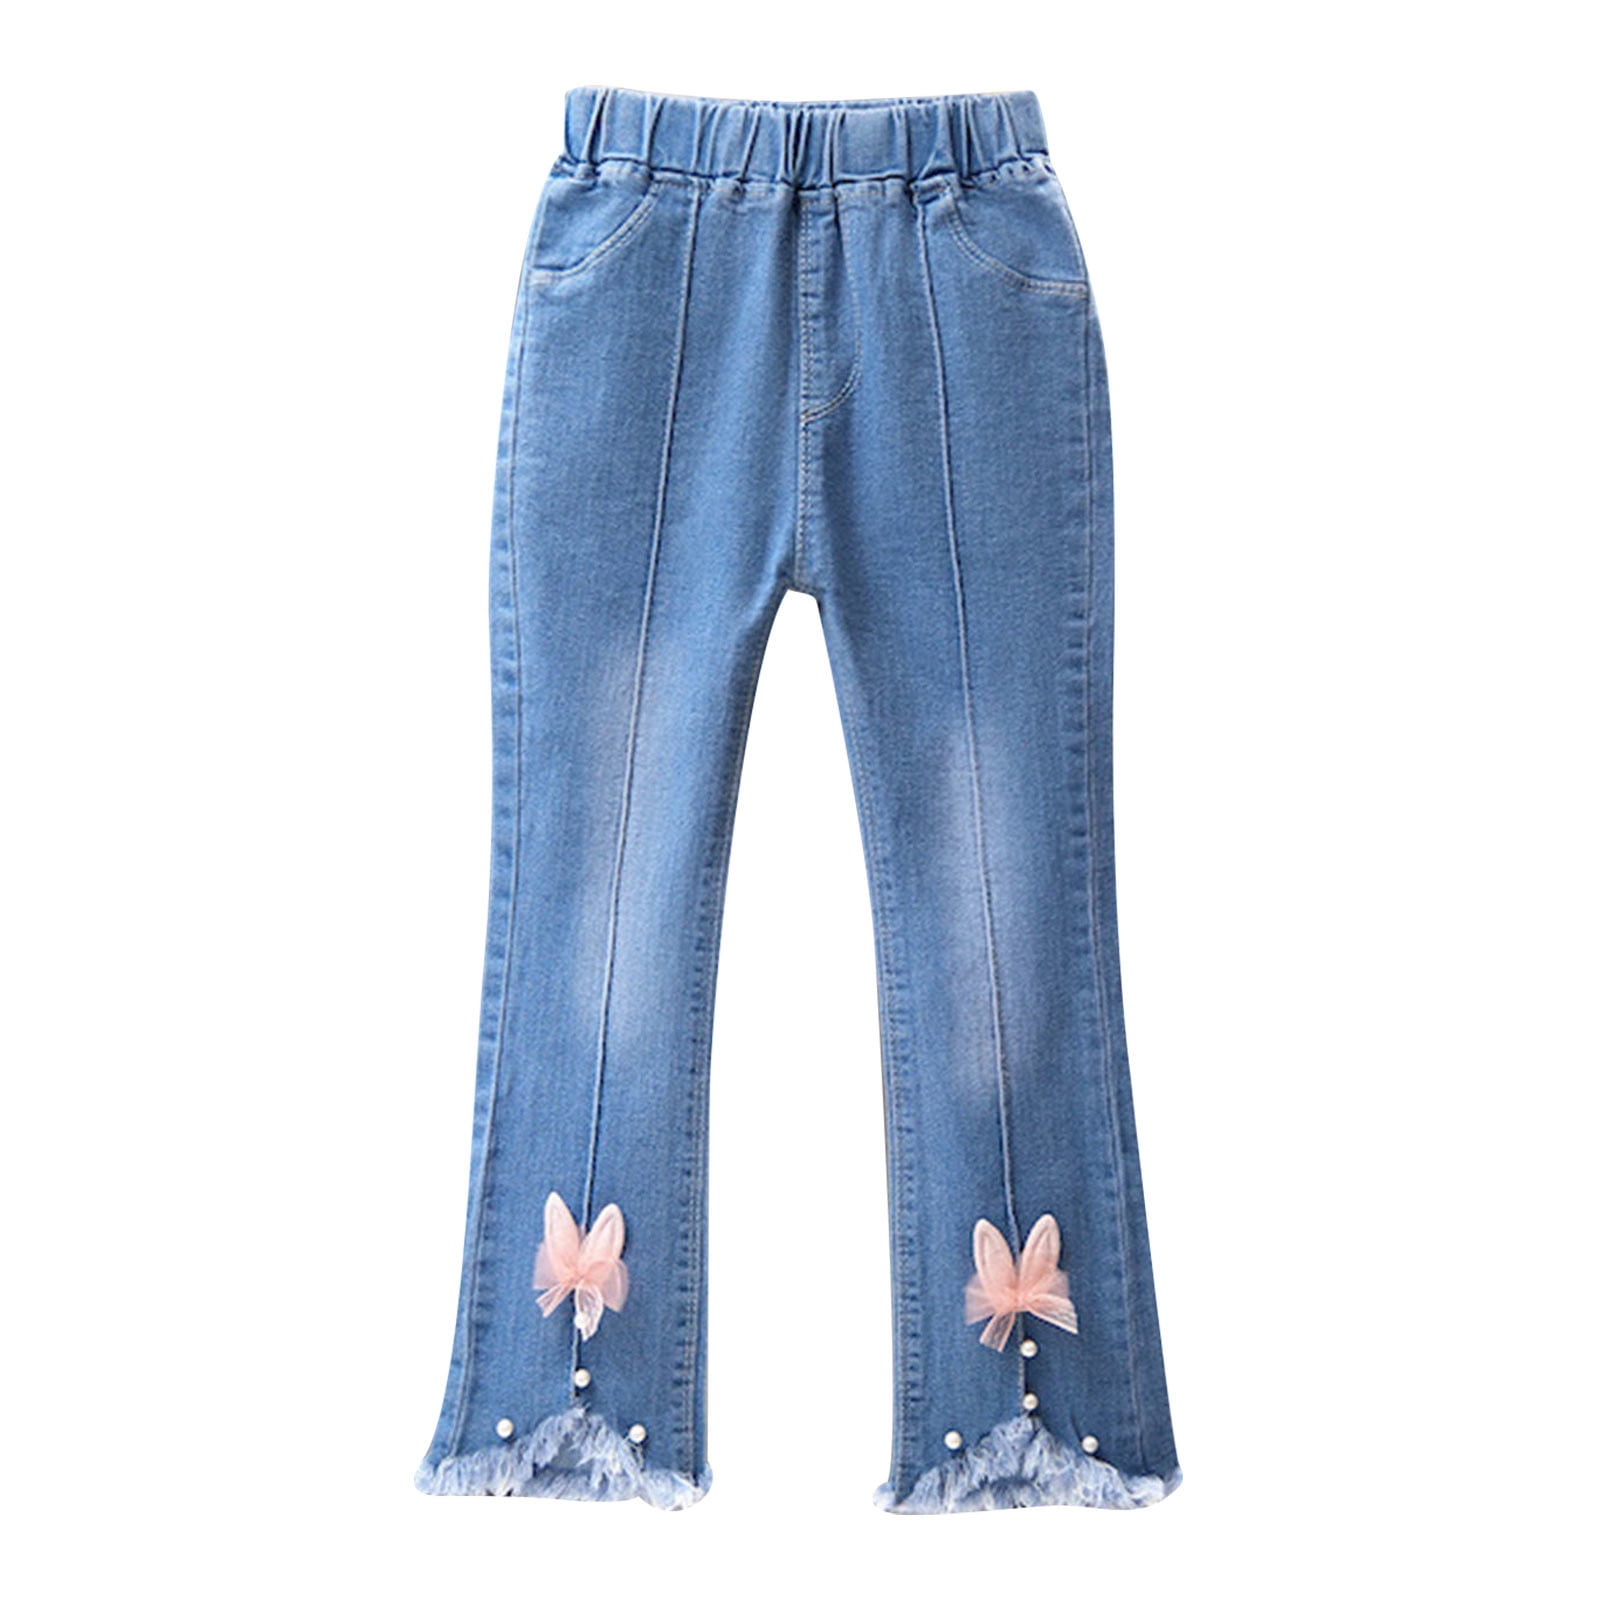 Baby Deals Spring Savings!2-13 Years Girls Flare Jeans,Girls Baggy Wide Leg  Jeans,Fashion Cute Sweet Boe Trousers Jeans ,Girls Bell Bottom Jeans